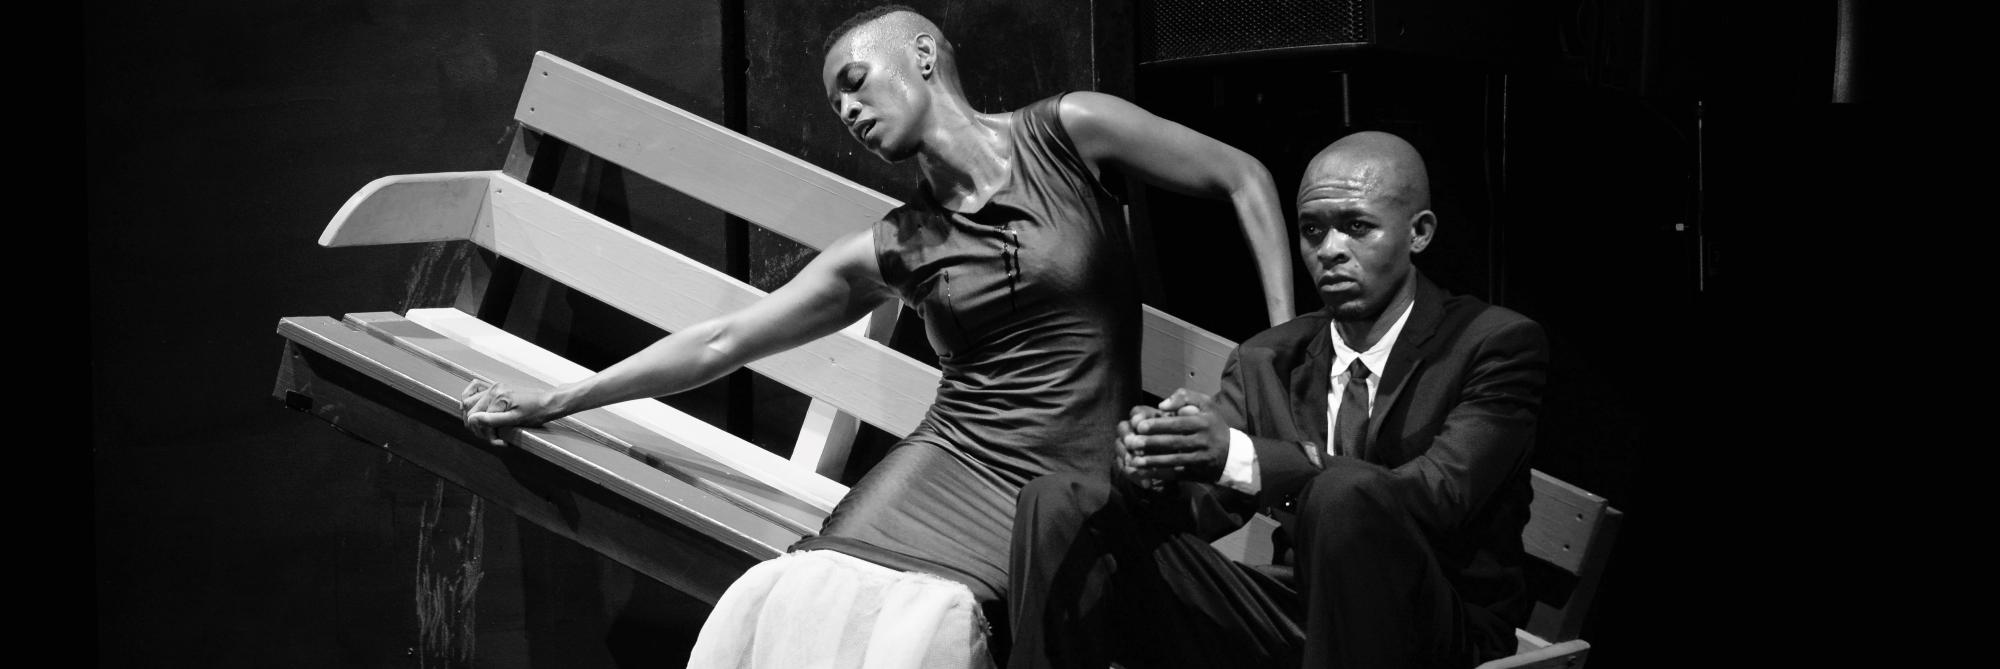 Photographed still from theatre production of Nyamza's De-Apart-Hate. Two people on a bench, one male-persenting in a suit looking off to the distance, one female-presenting in a dress reaching to the left. The bench is tilted so that the female-presenting performer appears to be sliding down to the right against the male-presenting performer.